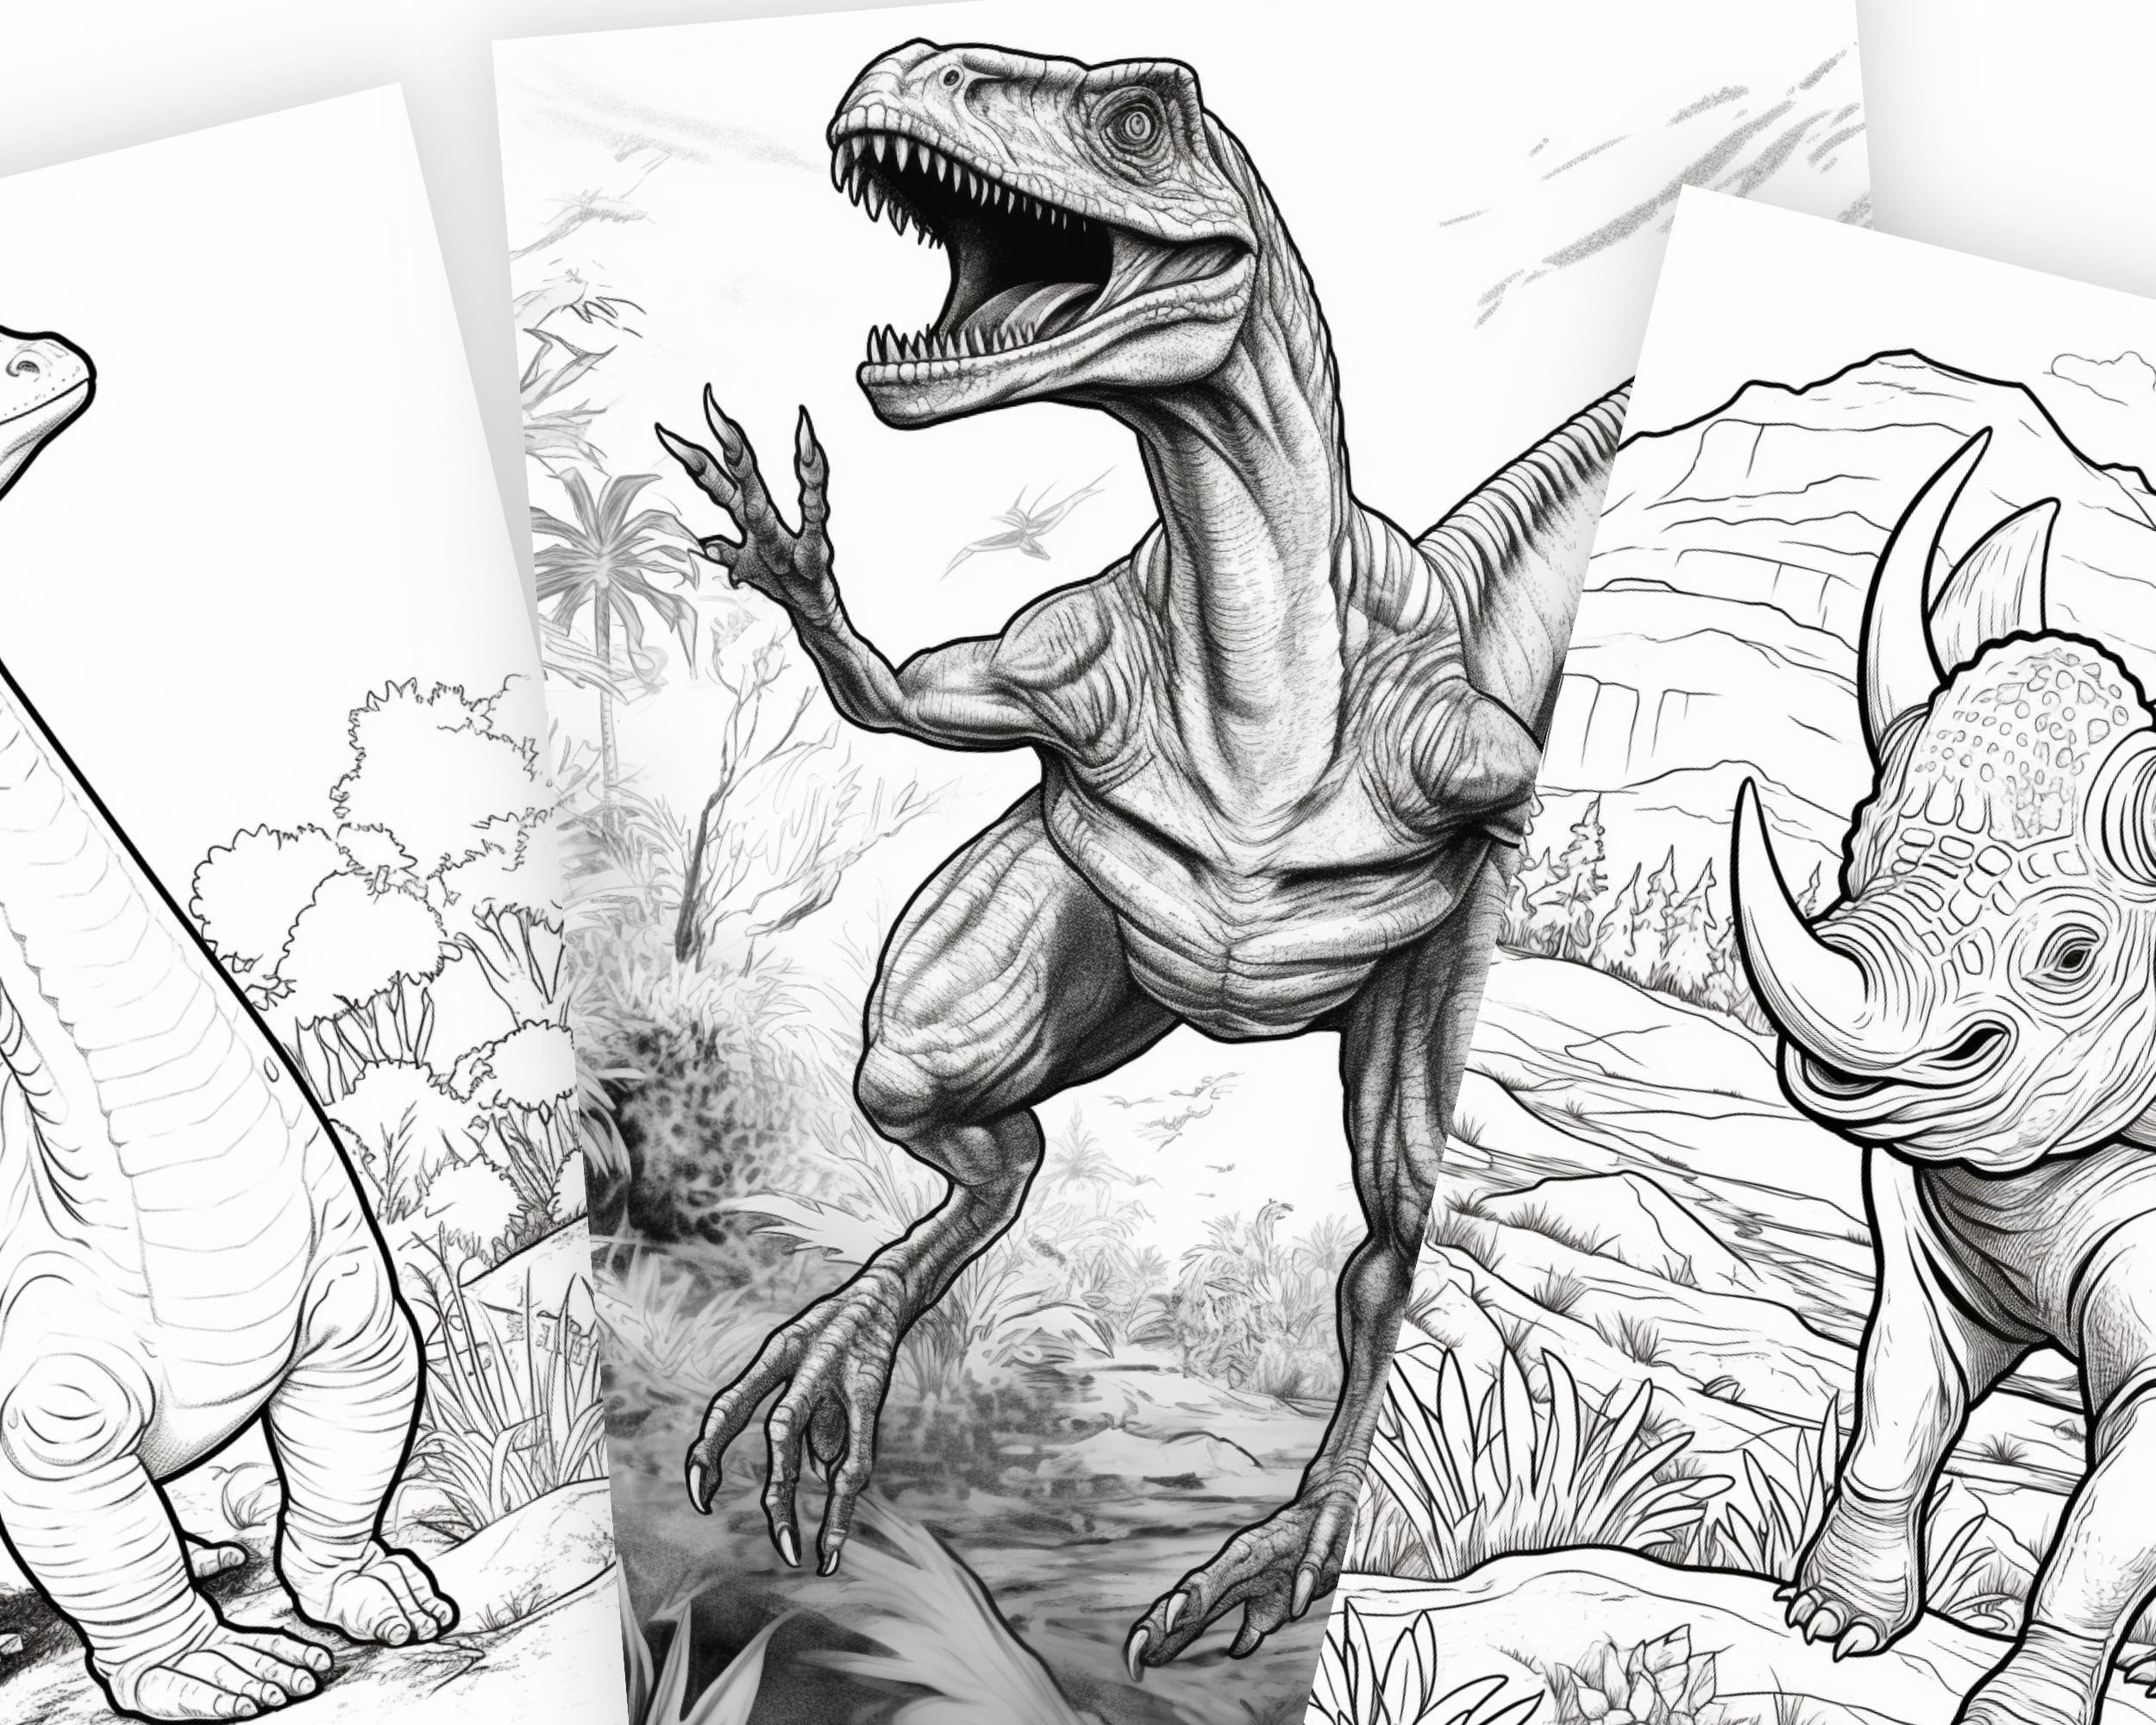 30+ Dinosaur Coloring Book, Dino Adventure Coloring Book, Printable PDF, Dinosaur Activity, Prehistoric Wonders coloring pages, 1 Full Color